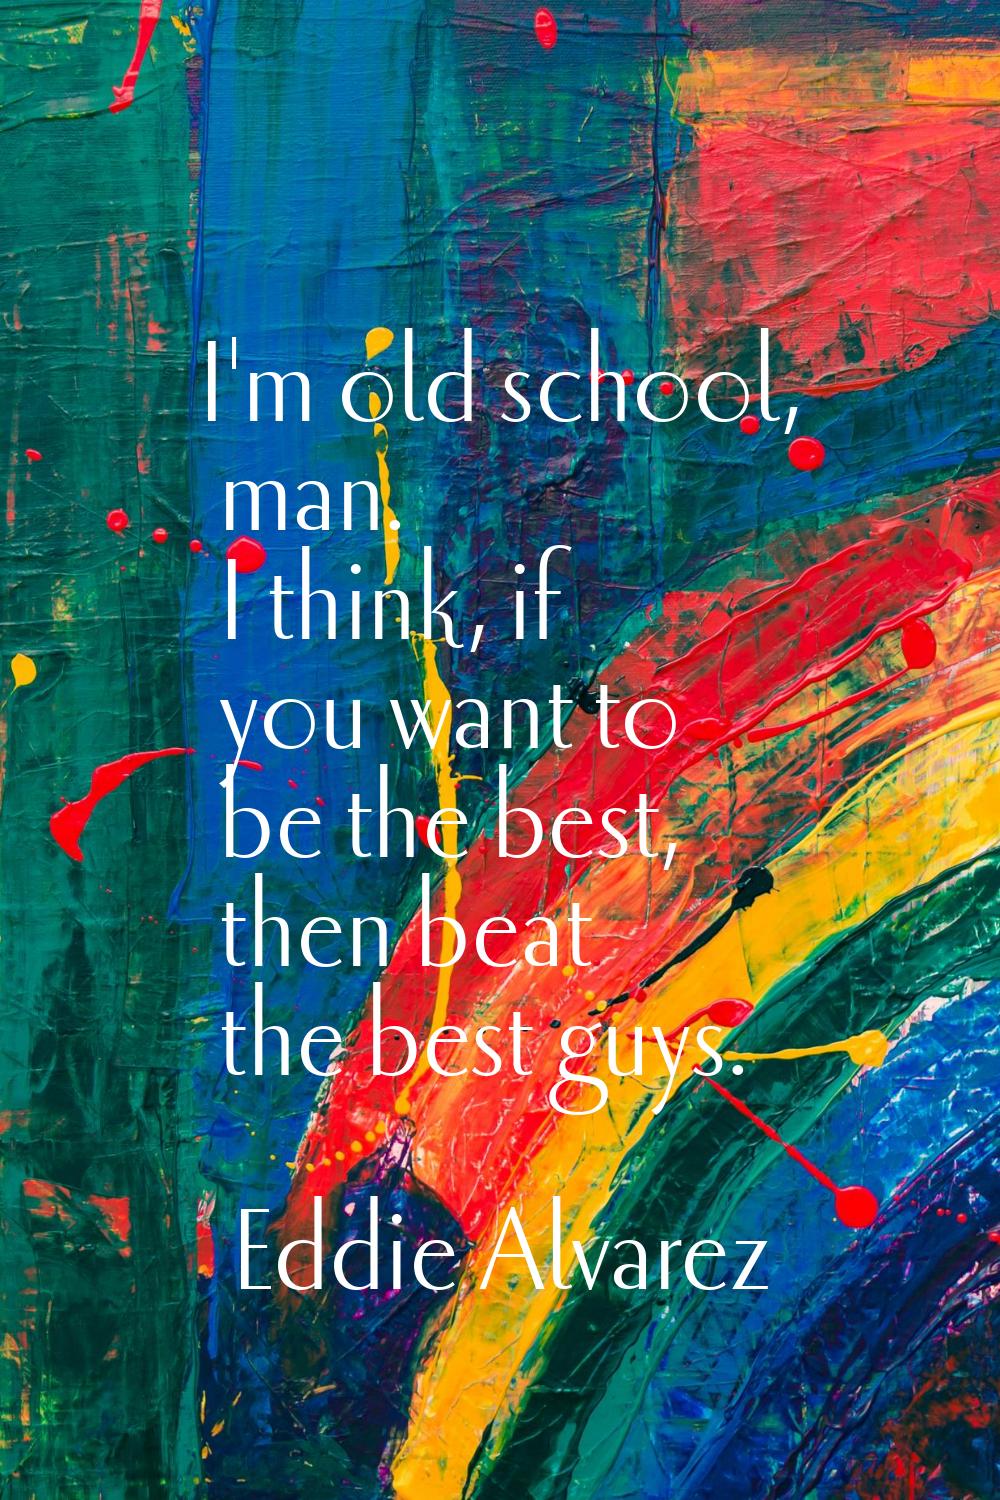 I'm old school, man. I think, if you want to be the best, then beat the best guys.